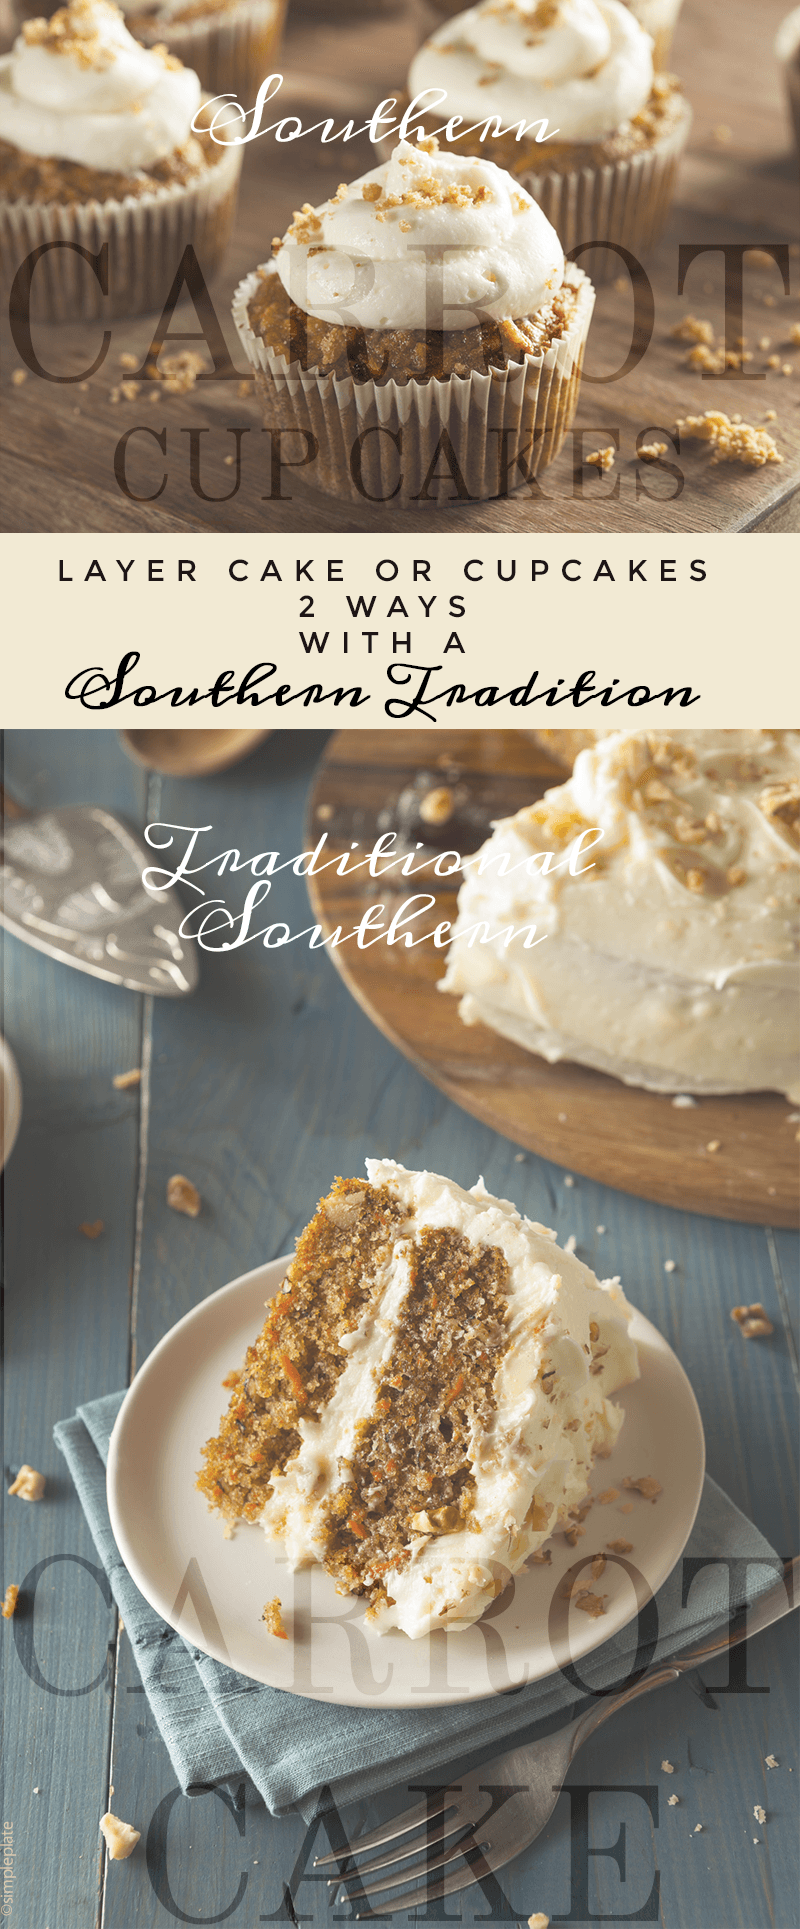 Layer Cake or Cupcakes Two Ways With A Southern Tradition